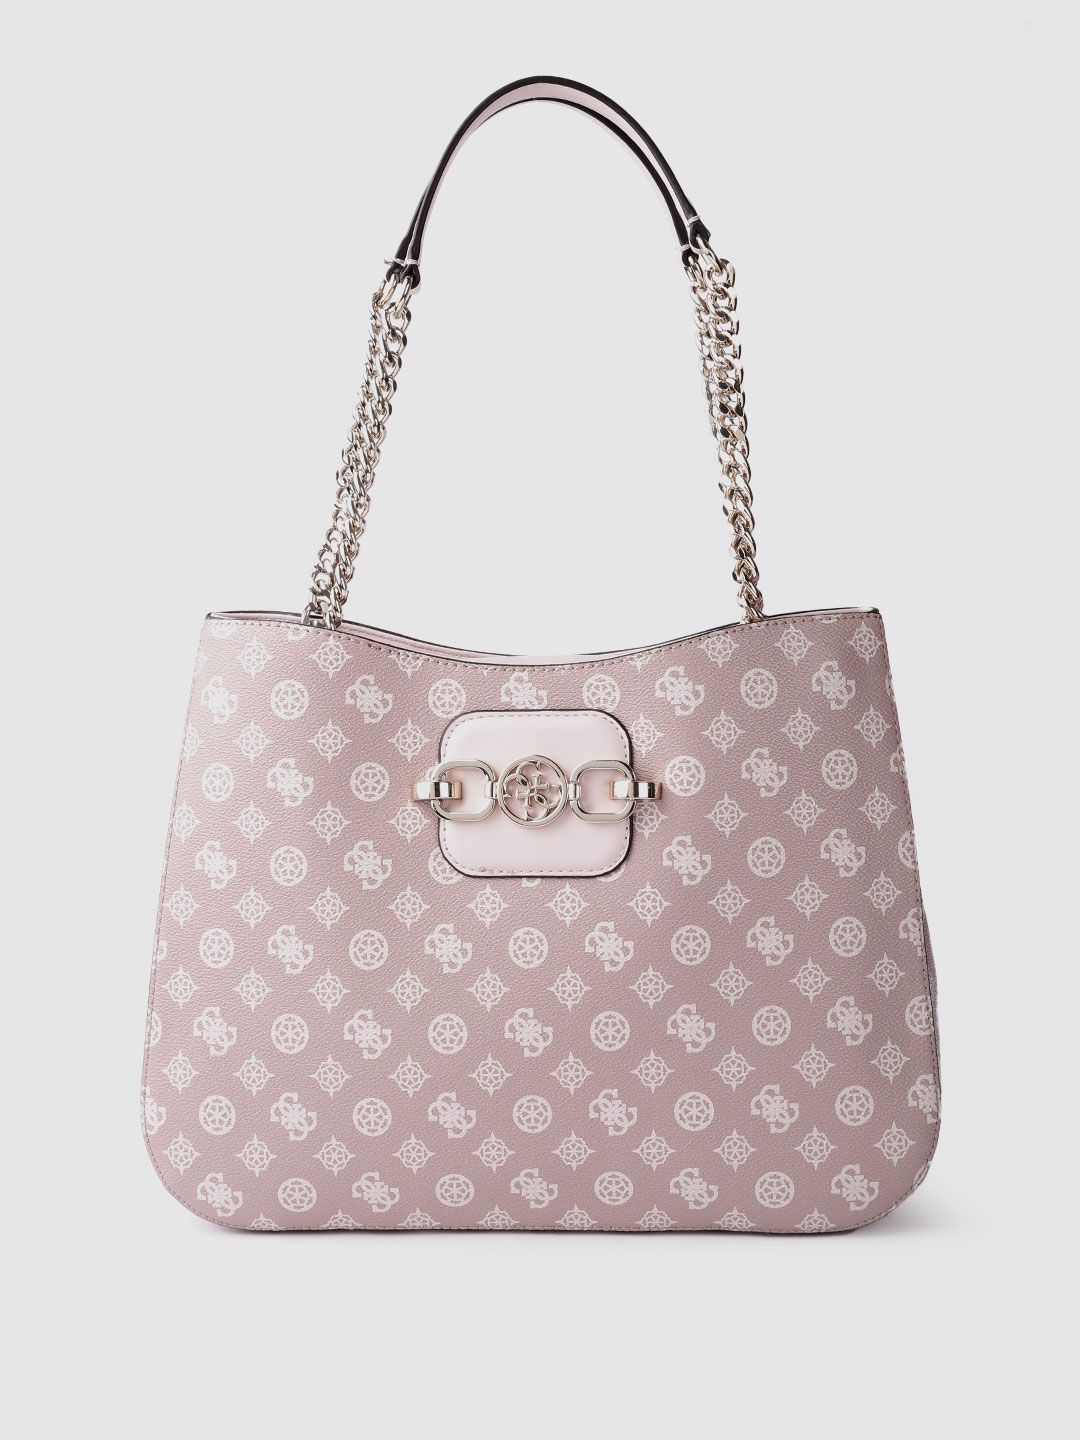 GUESS Women Dusty Pink & White Brand Logo Print Structured Shoulder Bag Price in India